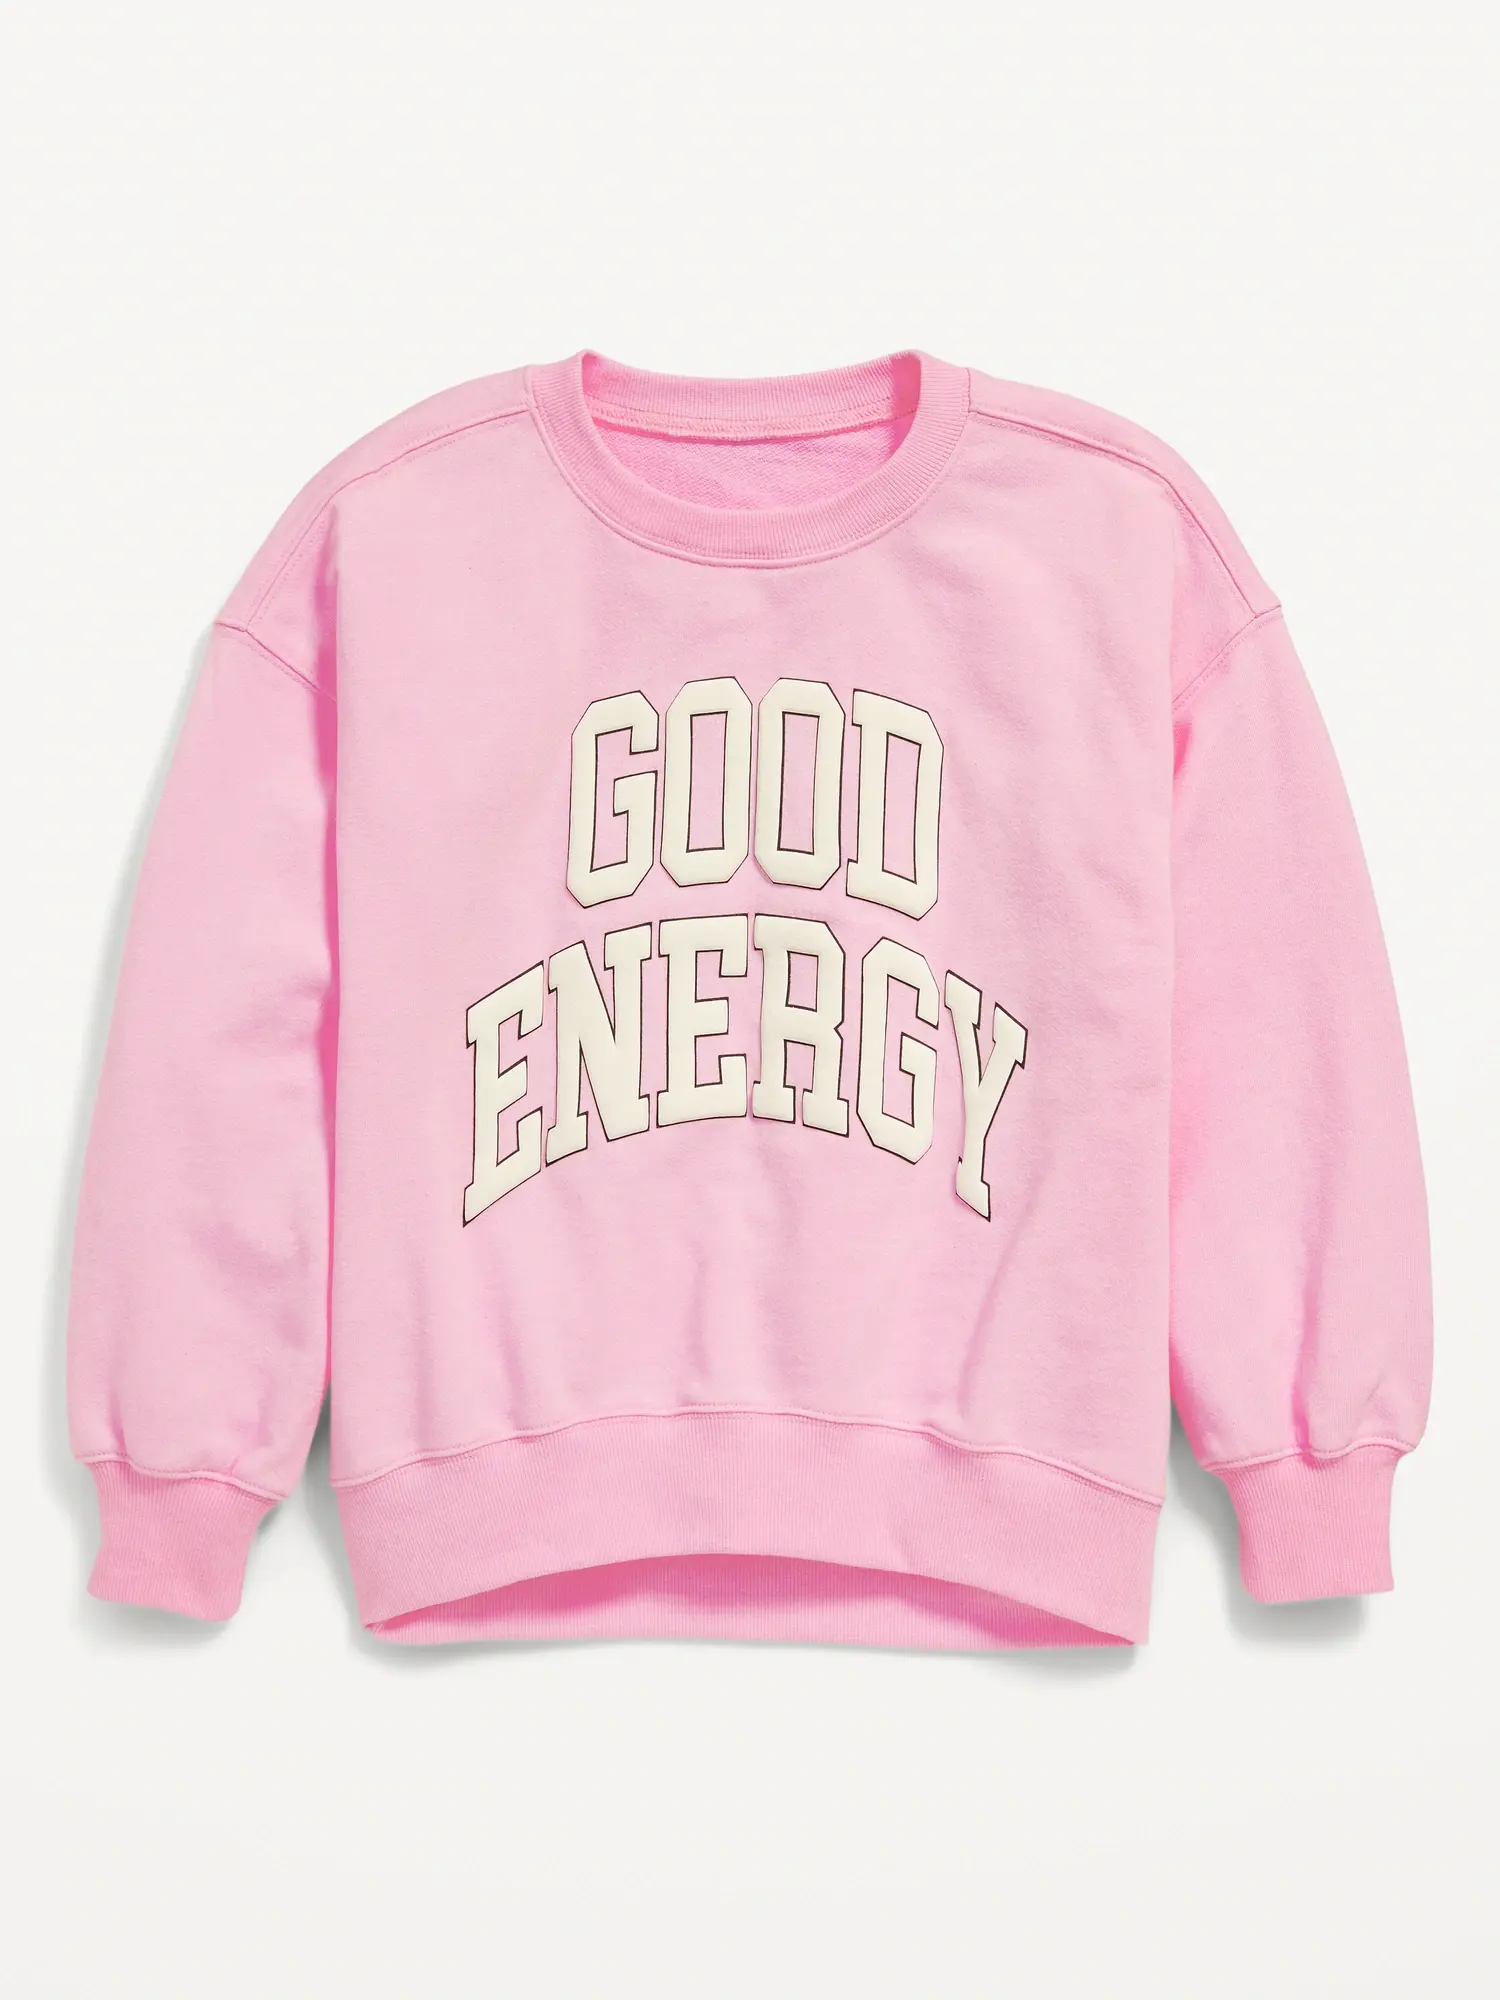 Old Navy Slouchy Crew Neck Graphic Sweatshirt for Girls pink. 1